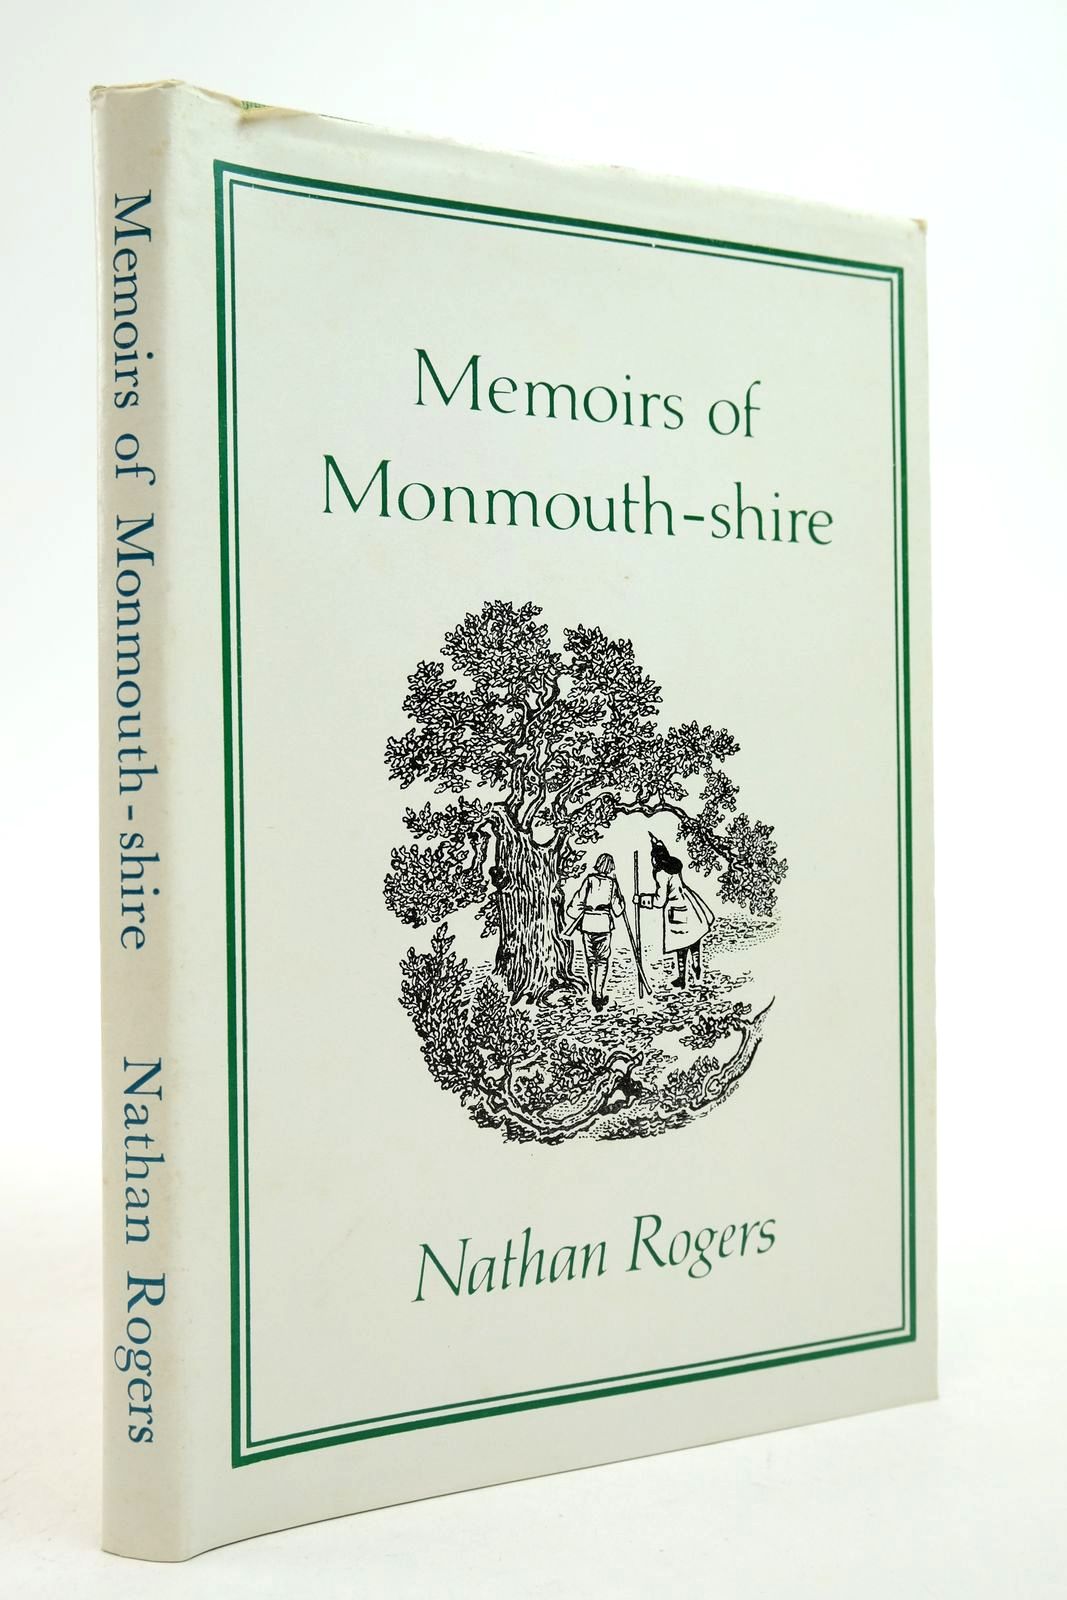 Photo of MEMOIRS OF MONMOUTH-SHIRE 1708 written by Rogers, Nathan illustrated by Waters, Linda published by Moss Rose Press (STOCK CODE: 2140450)  for sale by Stella & Rose's Books